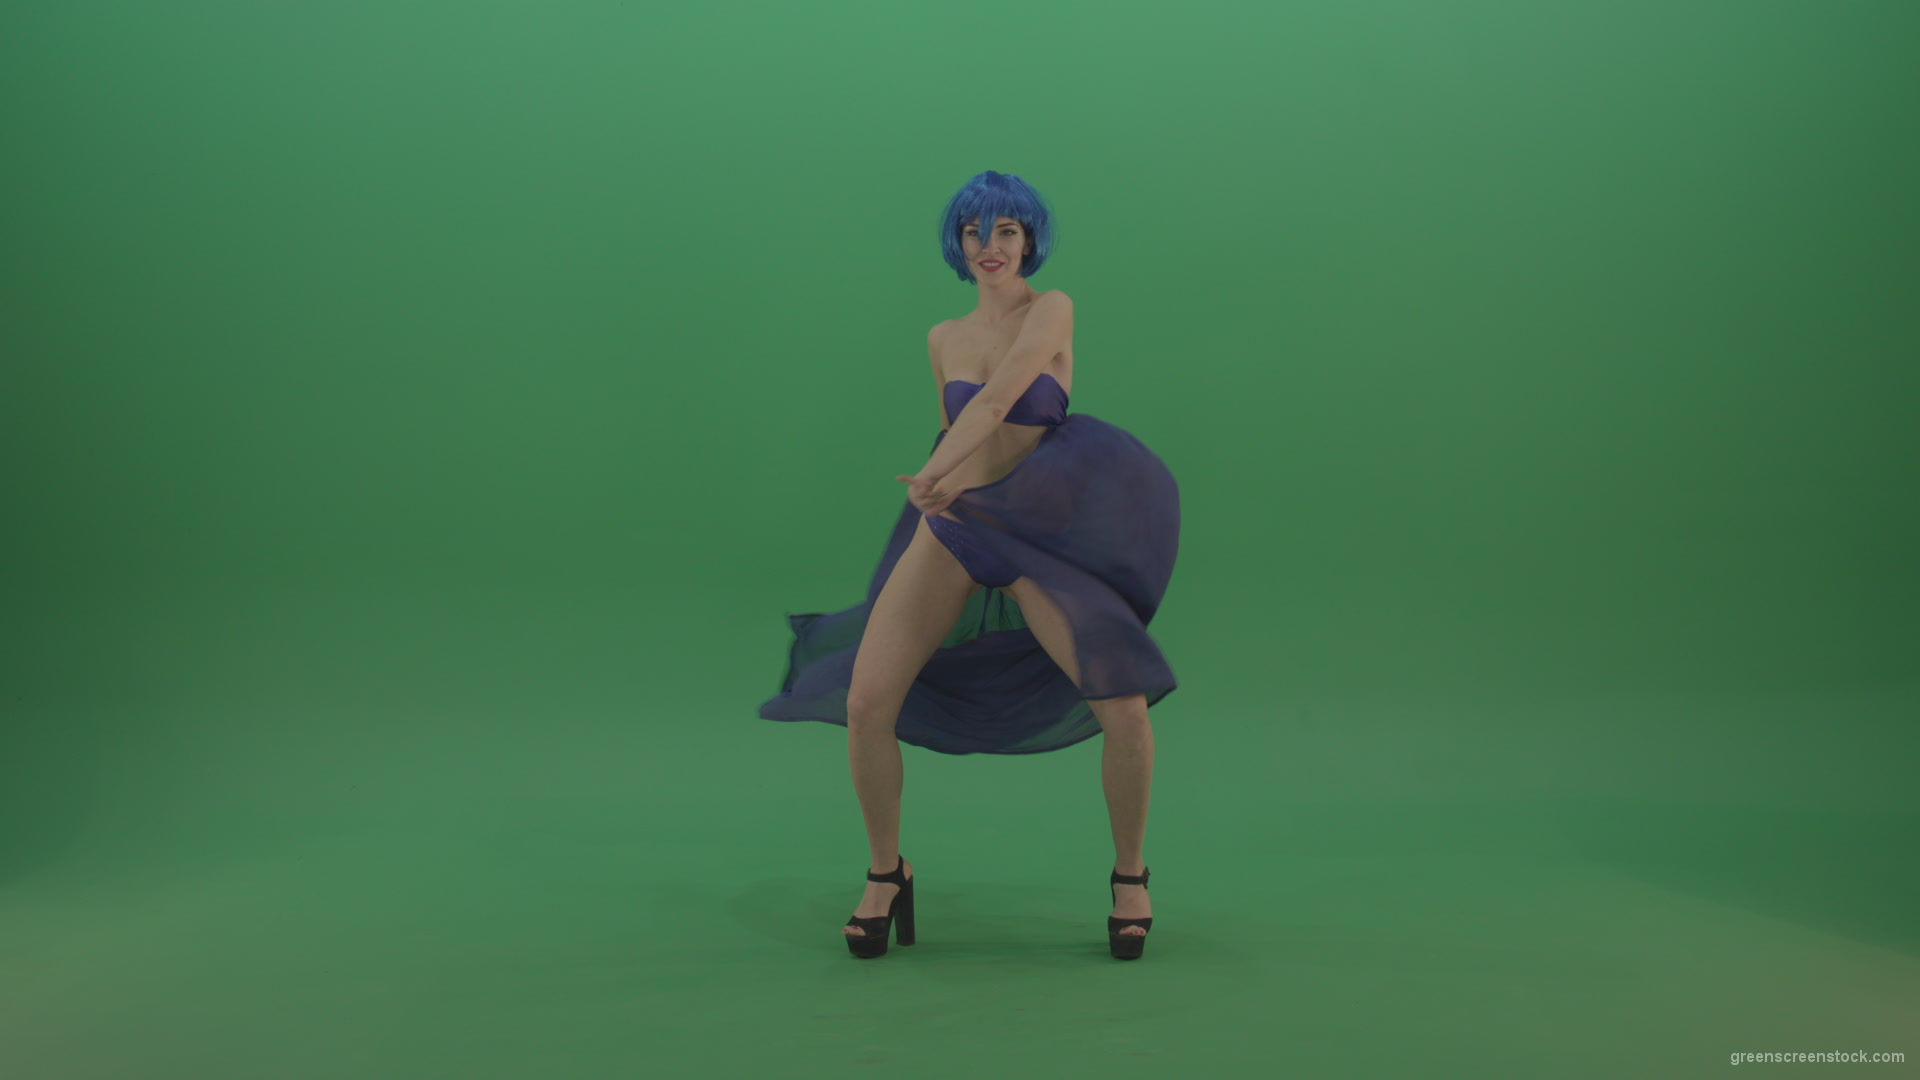 Full-size-erotic-young-girl-dancing-go-go-with-blue-dress-curtain-on-green-screen_009 Green Screen Stock